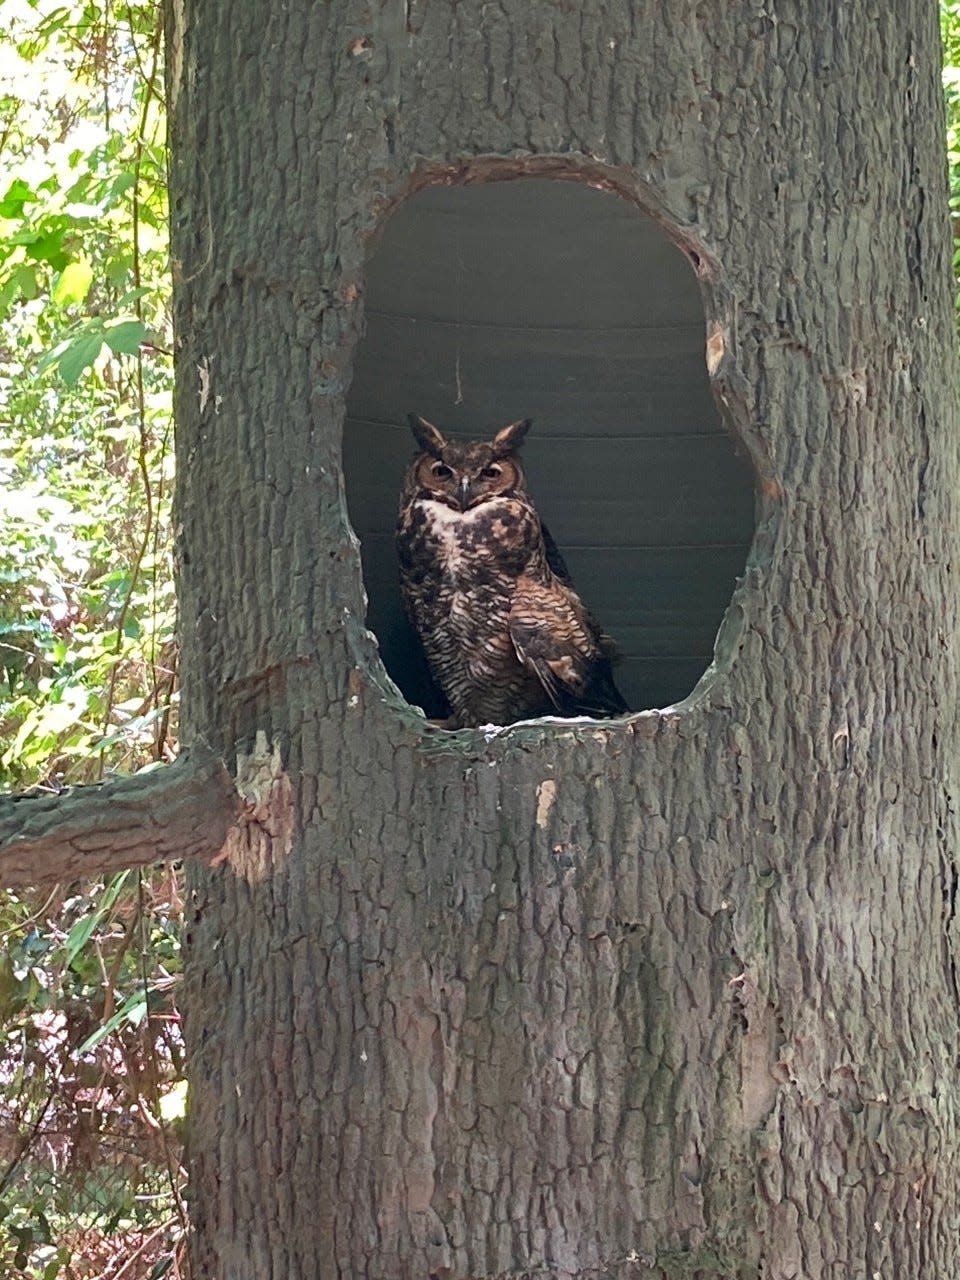 A sleepy great-horned owl in her habitat enclosure, she arrived at the wildlife center after recovering from an eye injury.